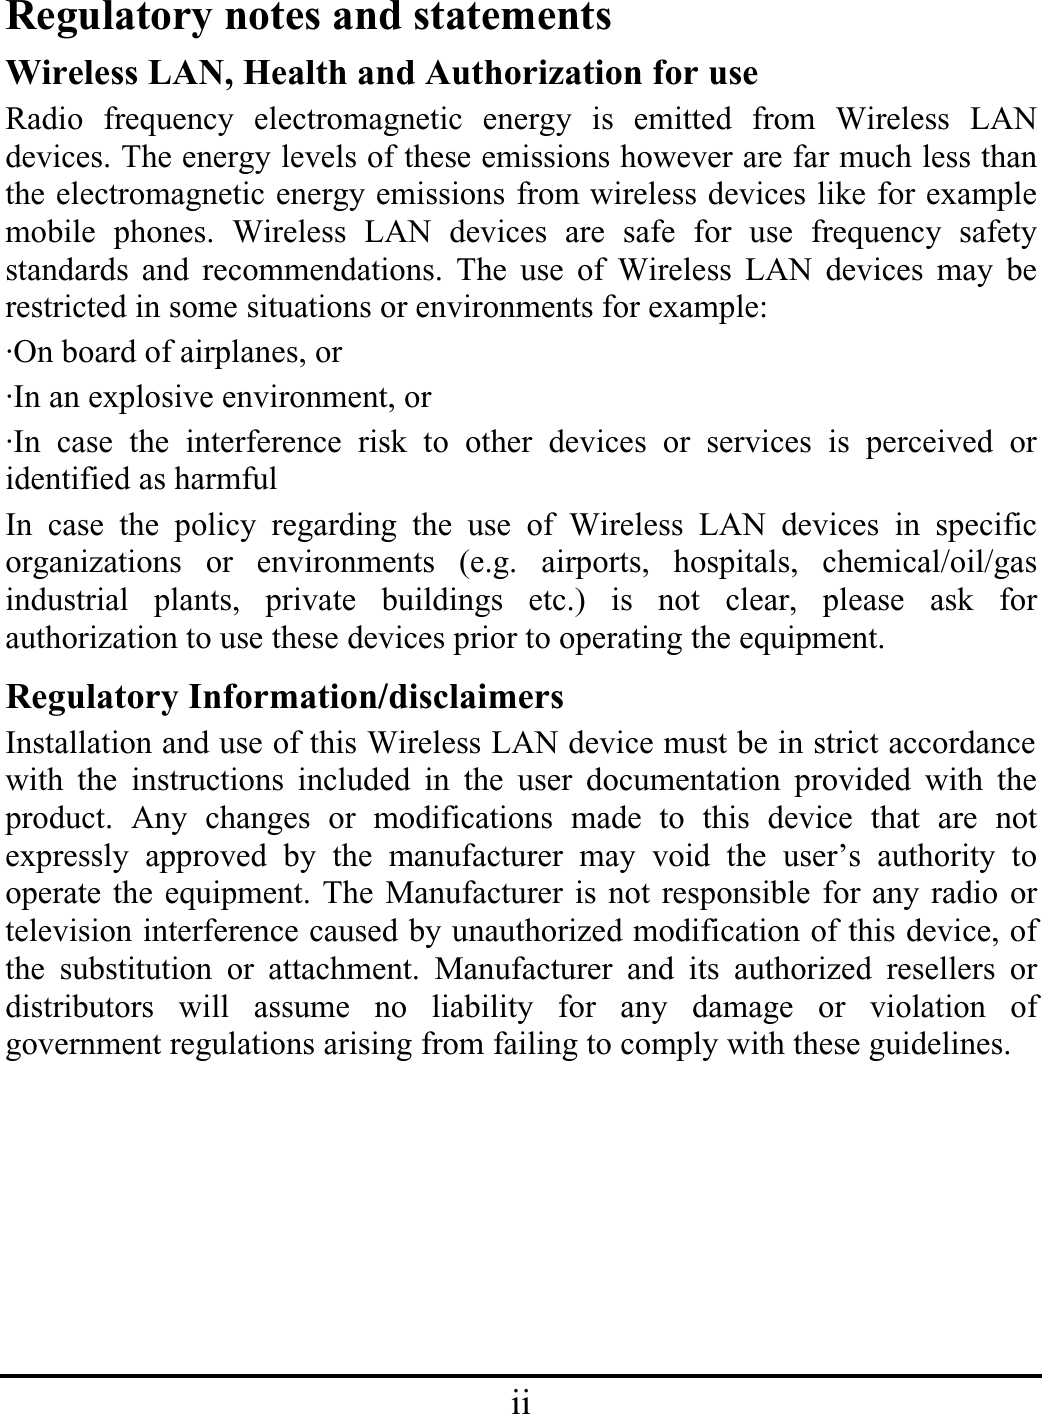 iiRegulatory notes and statementsWireless LAN, Health and Authorization for useRadio frequency electromagnetic energy is emitted from Wireless LANdevices. The energy levels of these emissions however are far much less thanthe electromagnetic energy emissions from wireless devices like for examplemobile phones. Wireless LAN devices are safe for use frequency safetystandards and recommendations. The use of Wireless LAN devices may berestricted in some situations or environments for example:·On board of airplanes, or·In an explosive environment, or·In case the interference risk to other devices or services is perceived oridentified as harmfulIn case the policy regarding the use of Wireless LAN devices in specificorganizations or environments (e.g. airports, hospitals, chemical/oil/gasindustrial plants, private buildings etc.) is not clear, please ask forauthorization to use these devices prior to operating the equipment.Regulatory Information/disclaimersInstallation and use of this Wireless LAN device must be in strict accordance with the instructions included in the user documentation provided with theproduct. Any changes or modifications made to this device that are notexpressly approved by the manufacturer may void the user’s authority tooperate the equipment. The Manufacturer is not responsible for any radio ortelevision interference caused by unauthorized modification of this device, ofthe substitution or attachment. Manufacturer and its authorized resellers ordistributors will assume no liability for any damage or violation ofgovernment regulations arising from failing to comply with these guidelines.